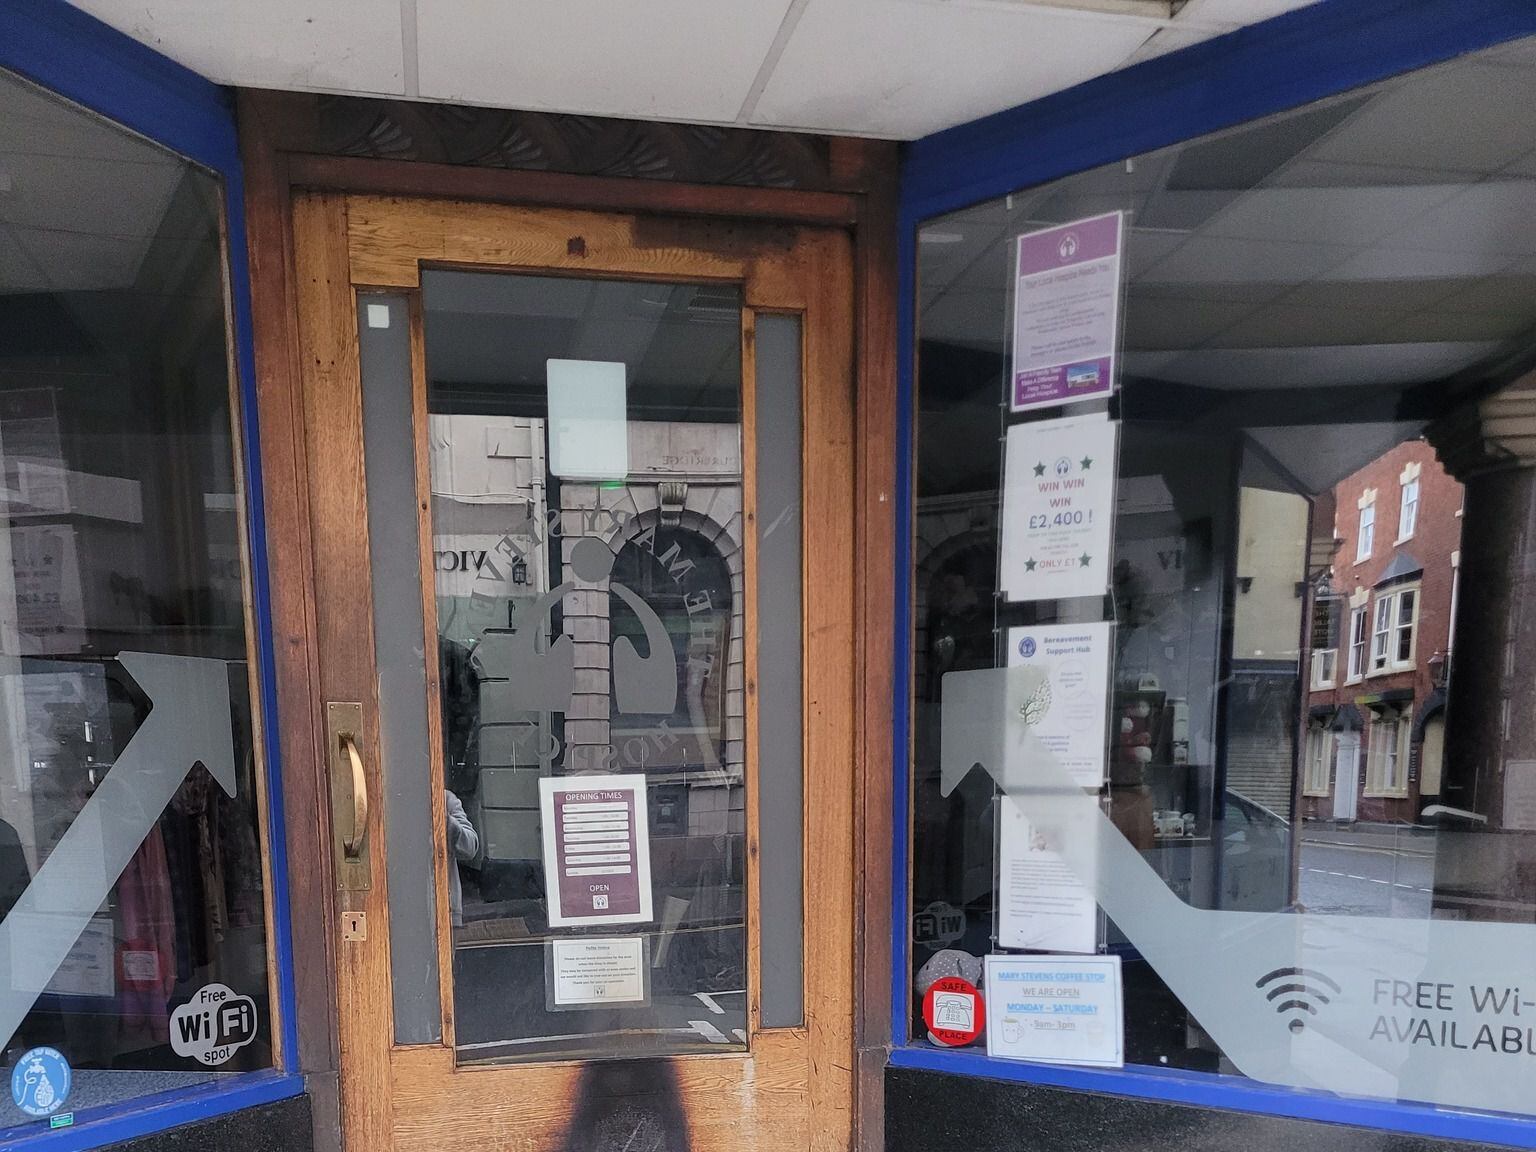 Cash-strapped hospice relieved charity shop prevented from burning down after arson